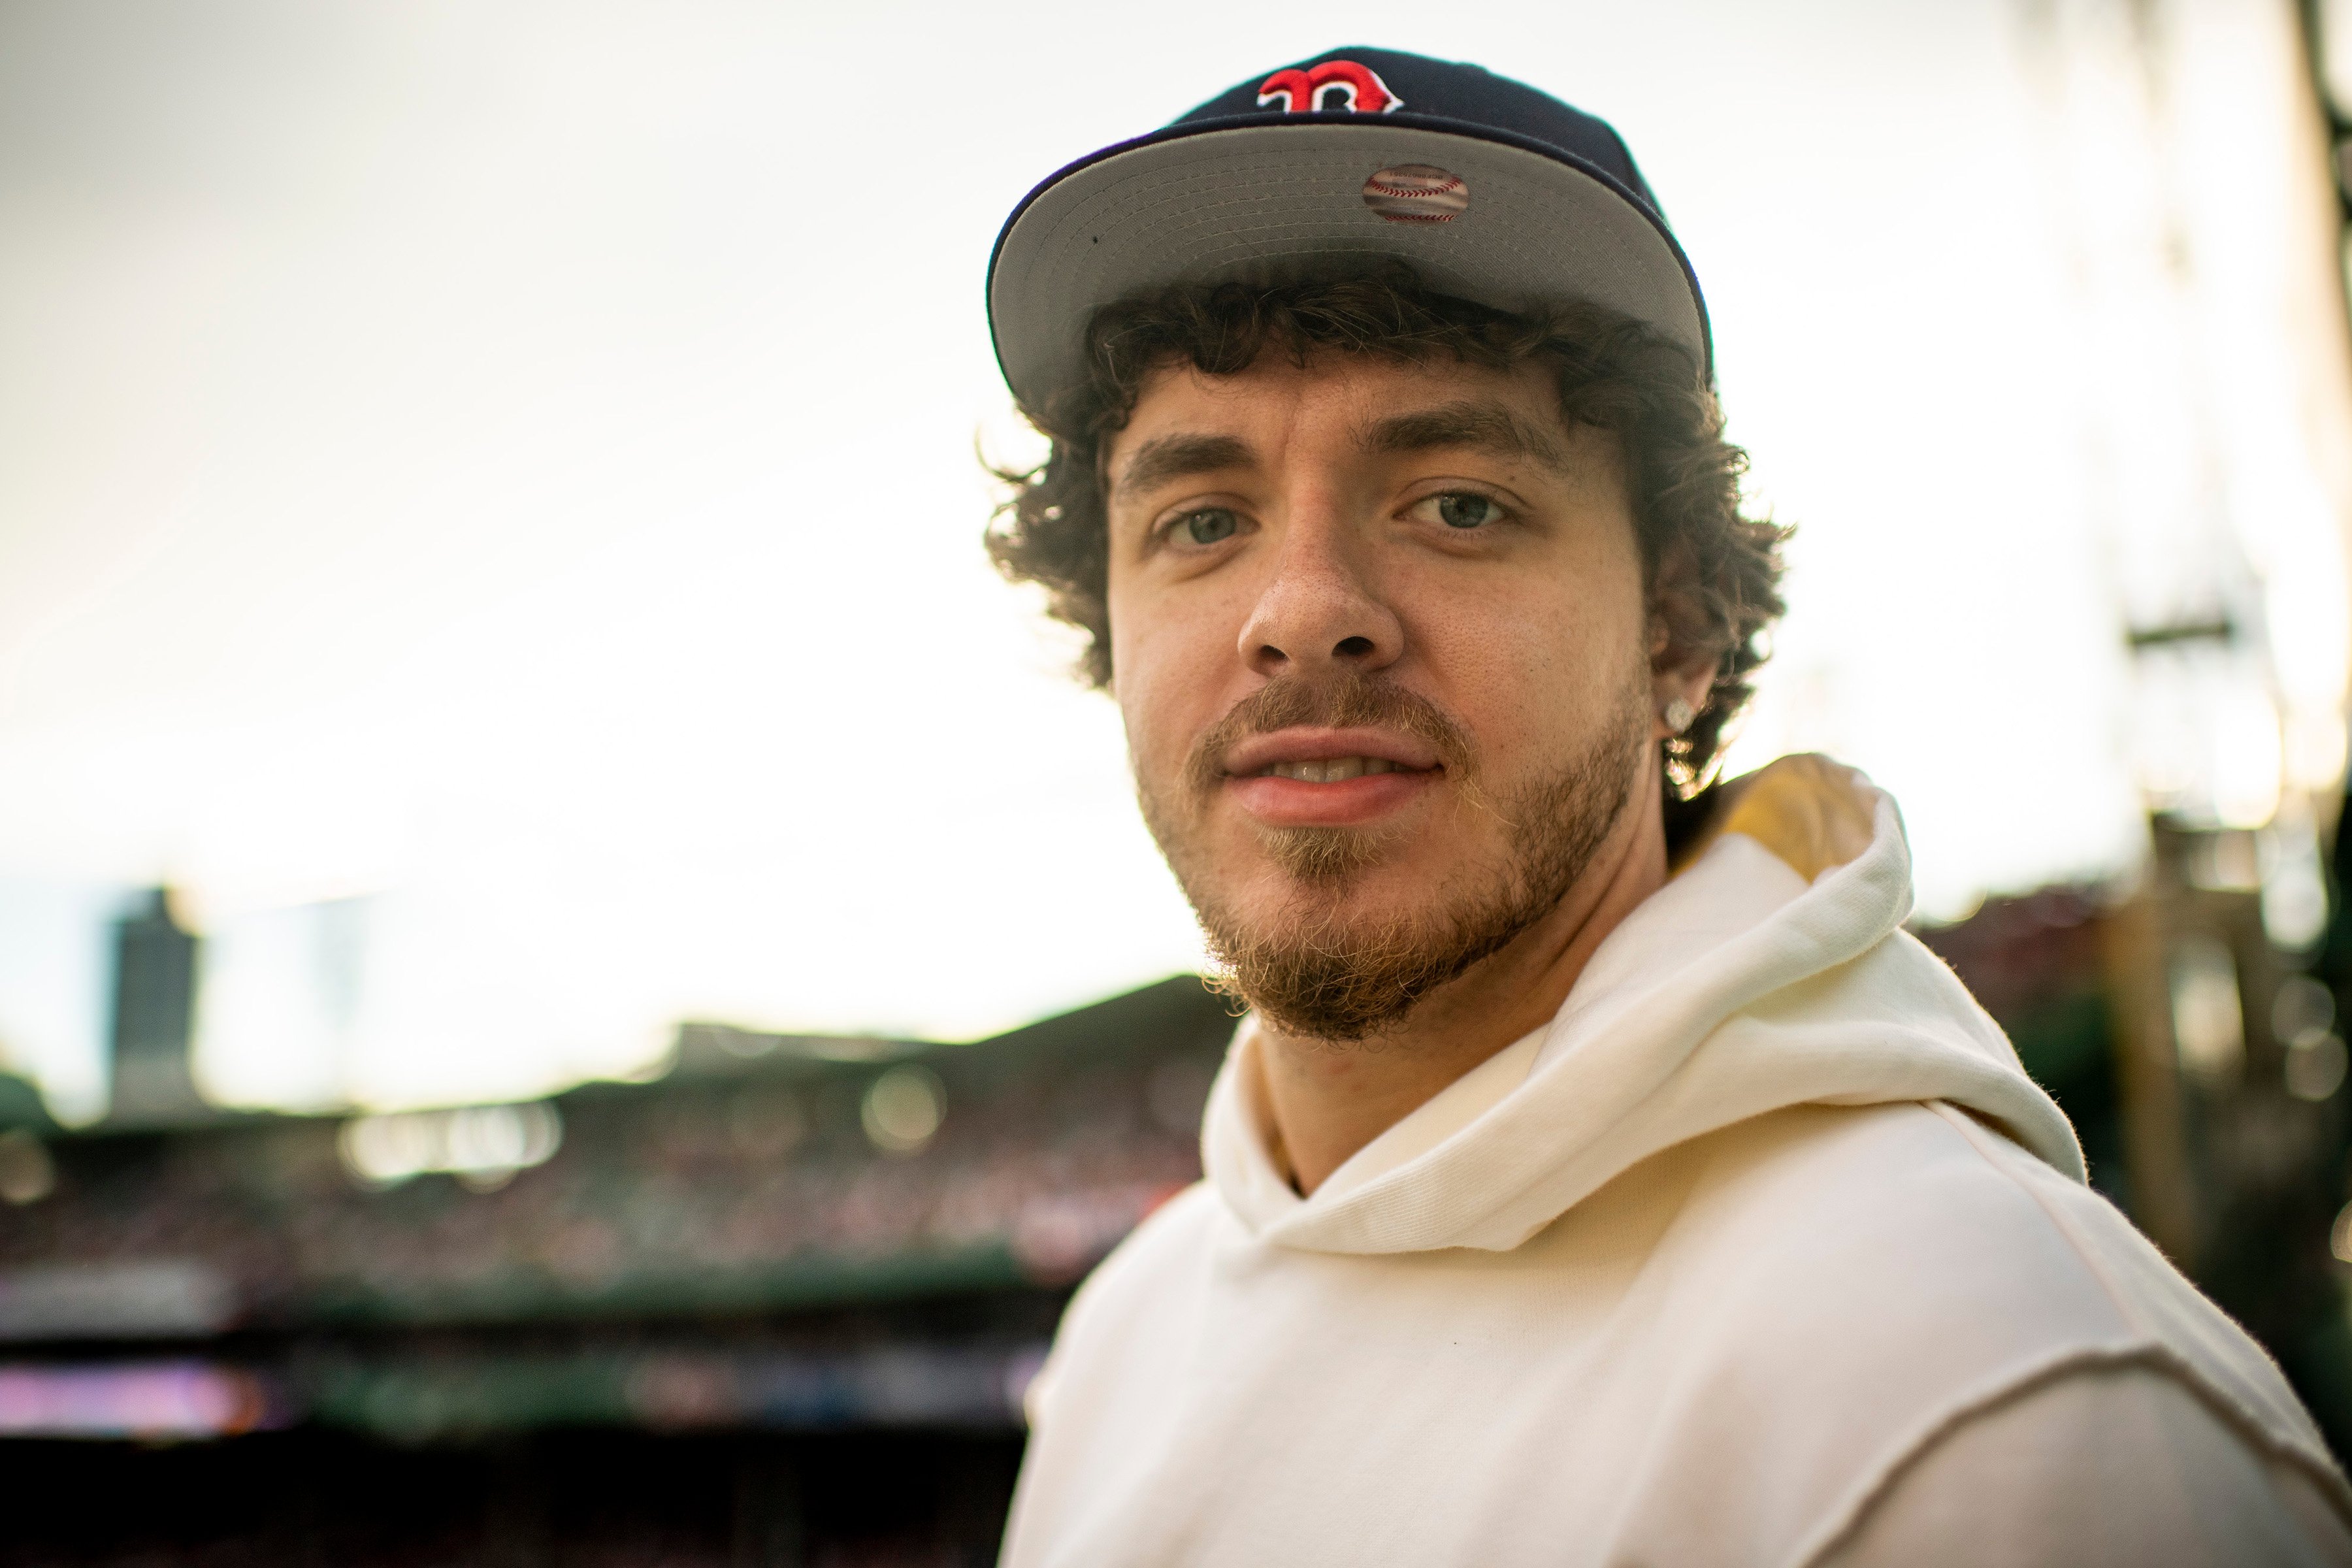 Rapper Jack Harlow poses for a photograph during a game between the Boston Red Sox and the New York Yankees on September 25, 2021 at Fenway Park in Boston, Massachusetts